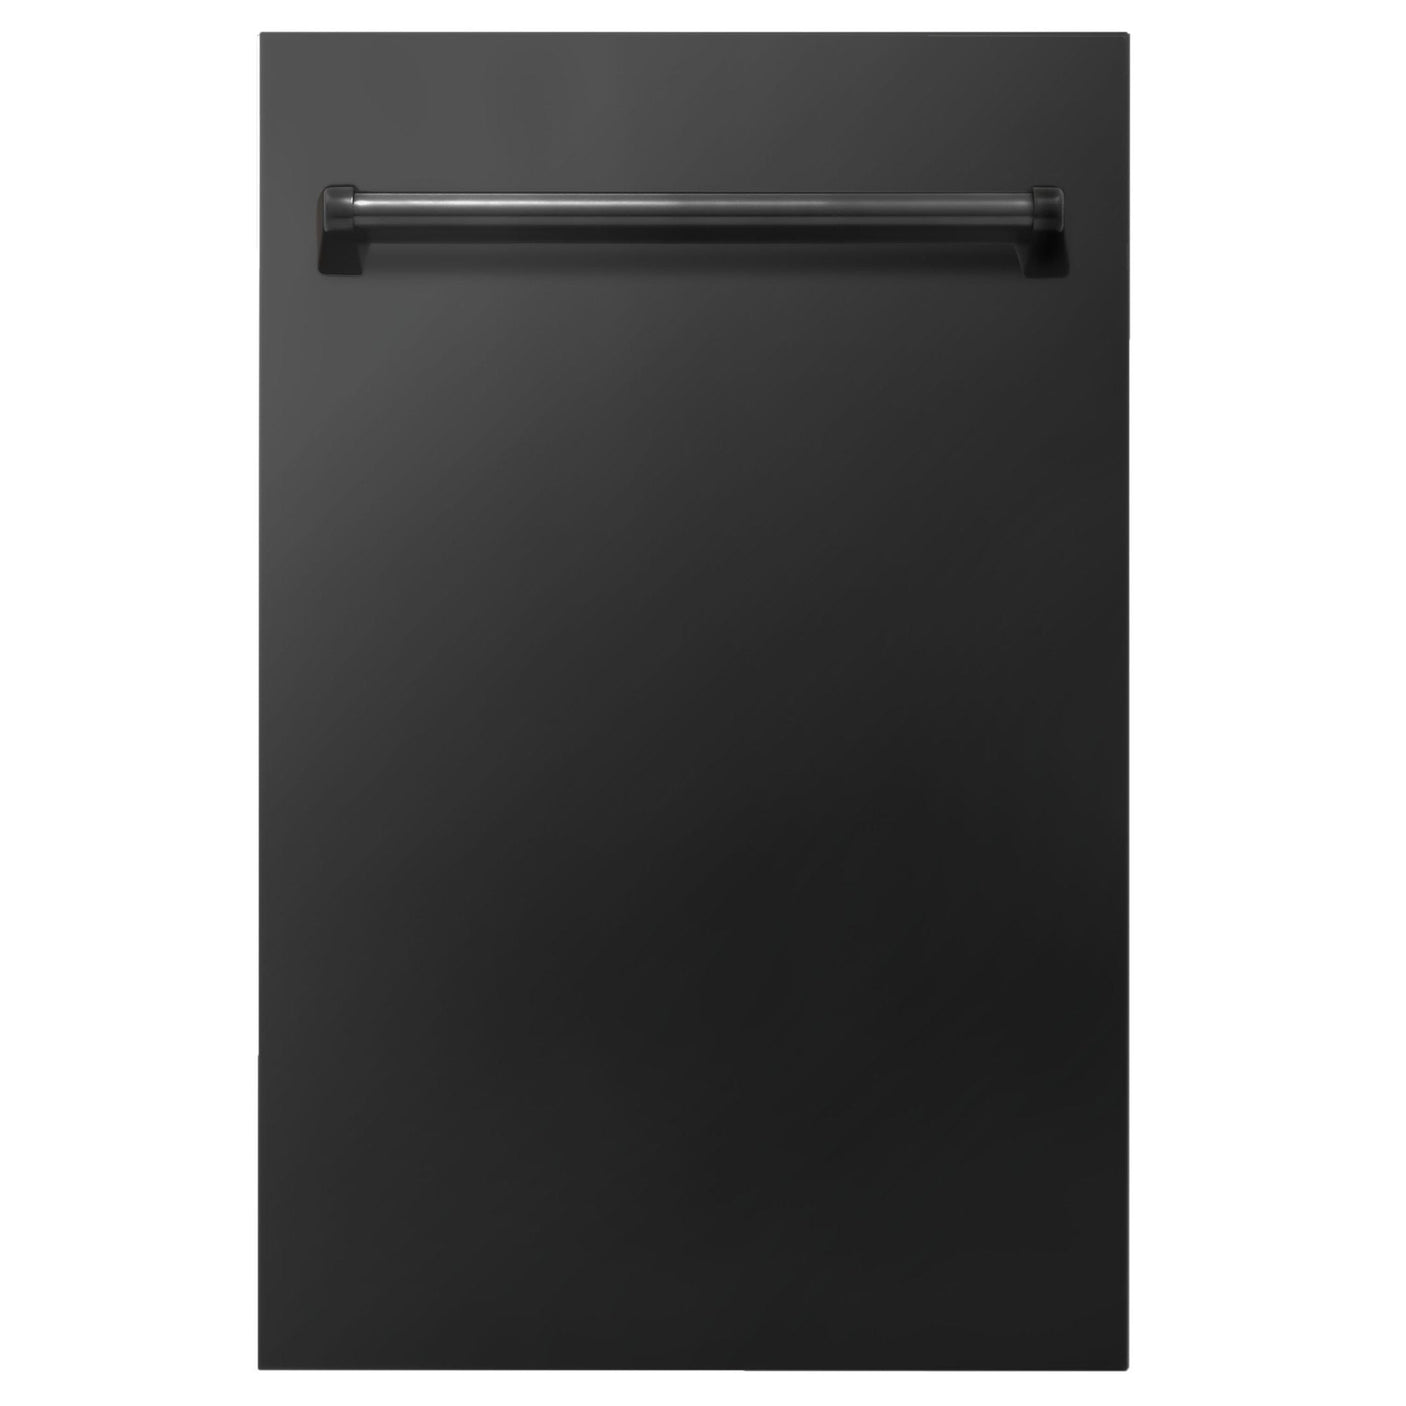 ZLINE 18 in. Dishwasher Panel with Traditional Handle (DP-18) [Color: Oil Rubbed Bronze]